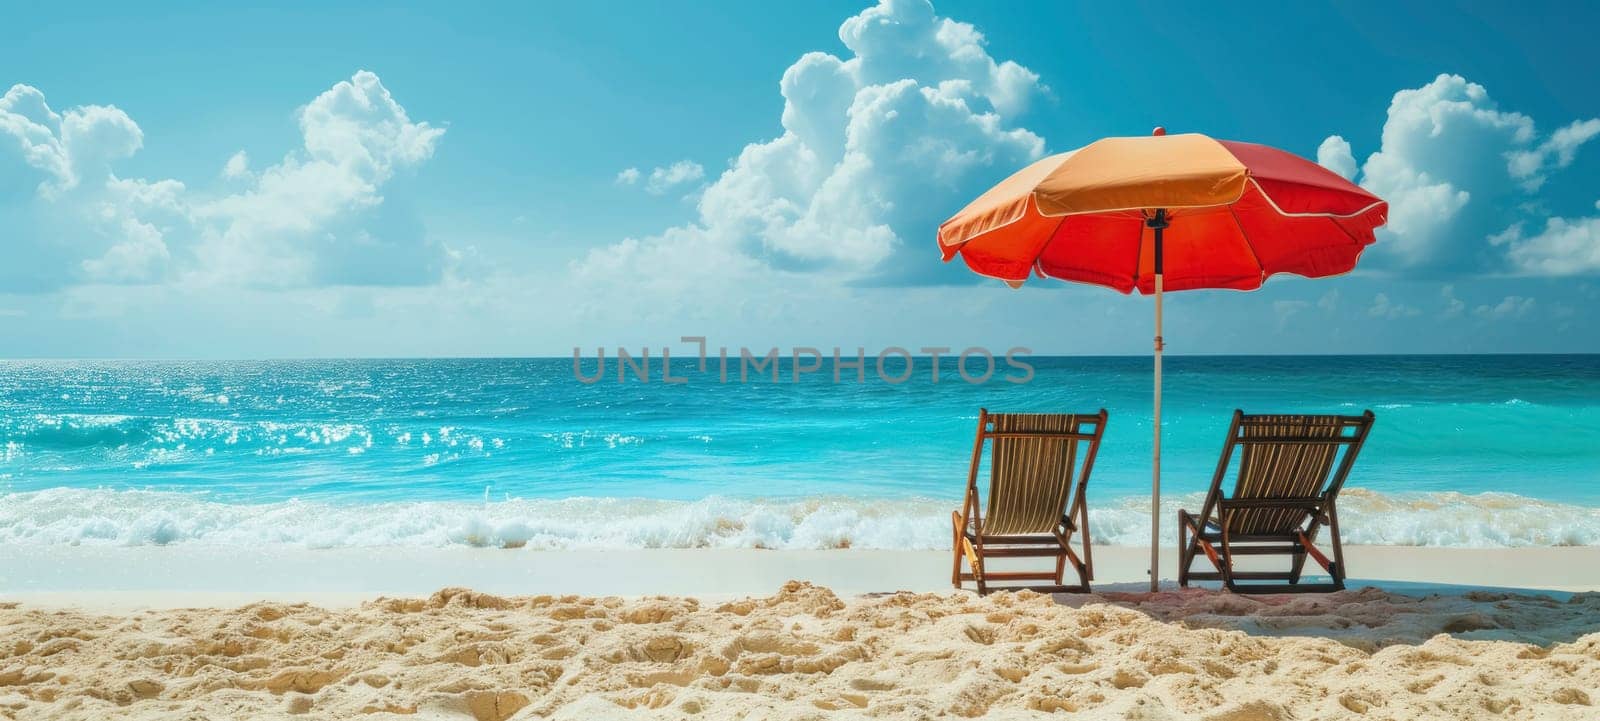 Two wooden chairs and a bright red umbrella on a tranquil sandy beach against a clear blue sky and turquoise sea.